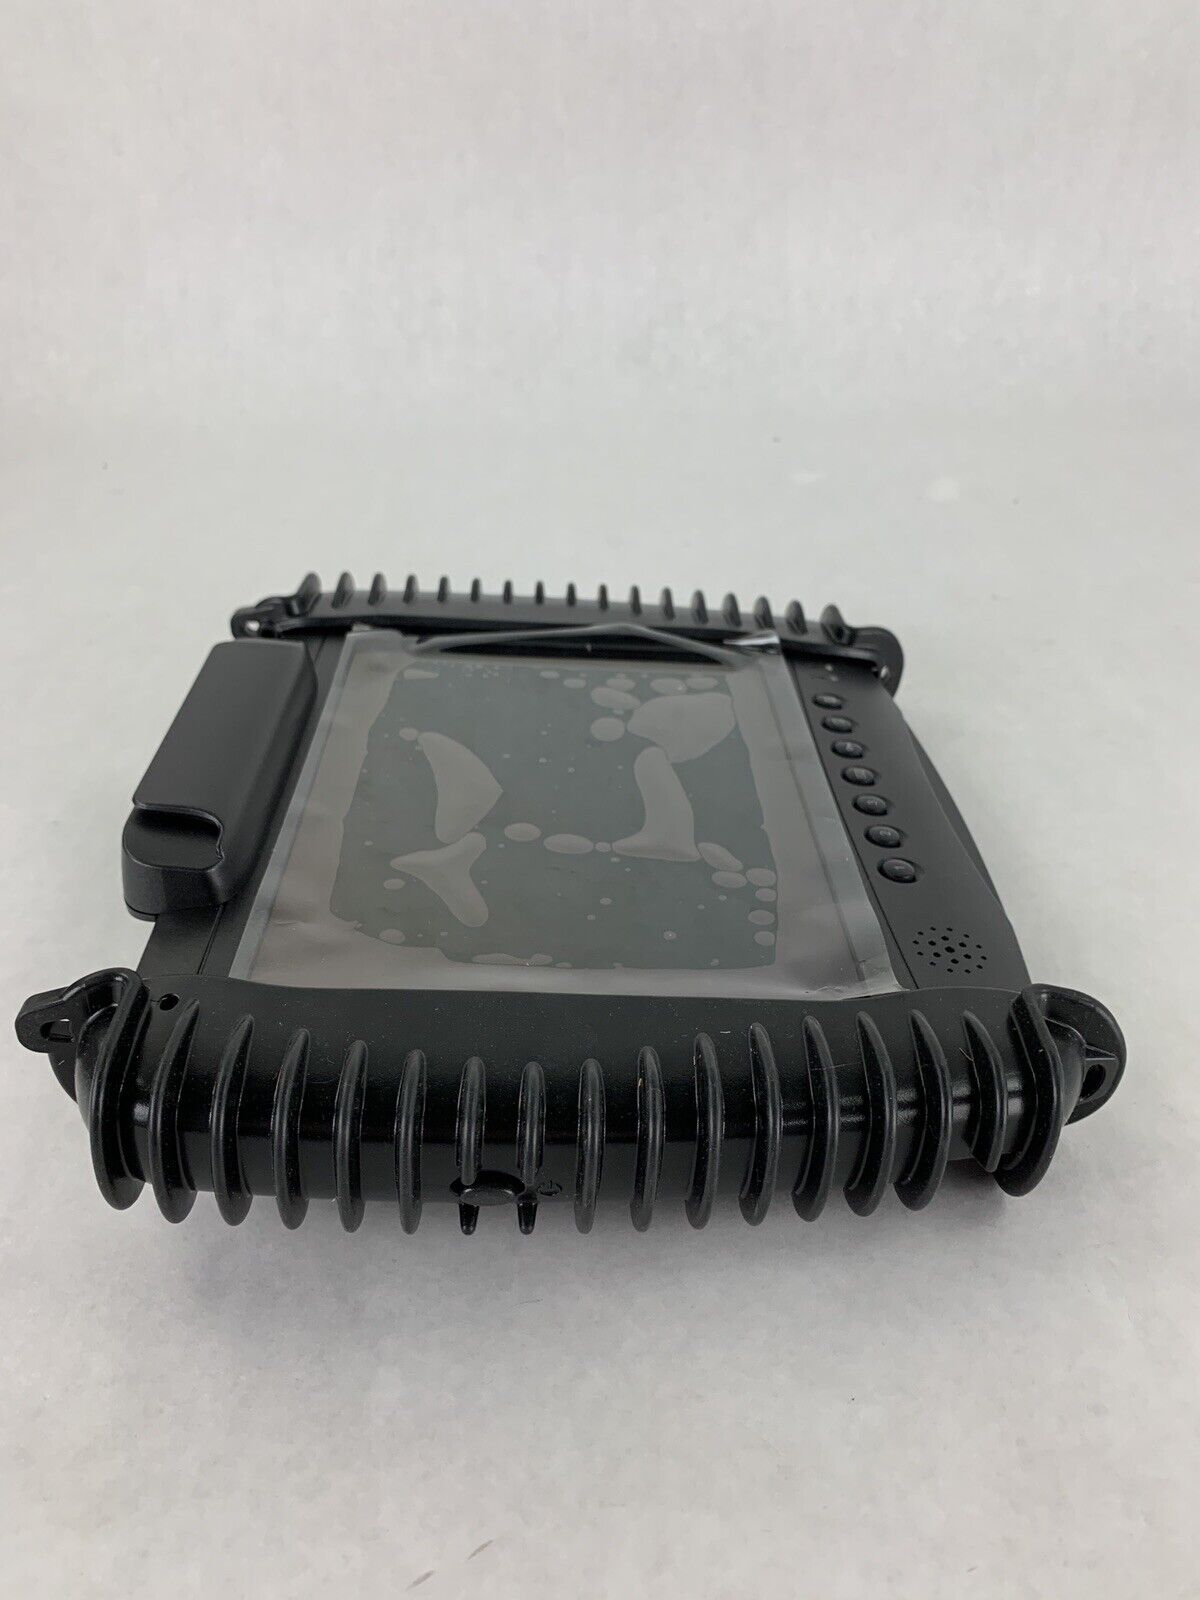 New Box Opened DT Research DT362 Rugged Mobile POS Tablet with Case And PS